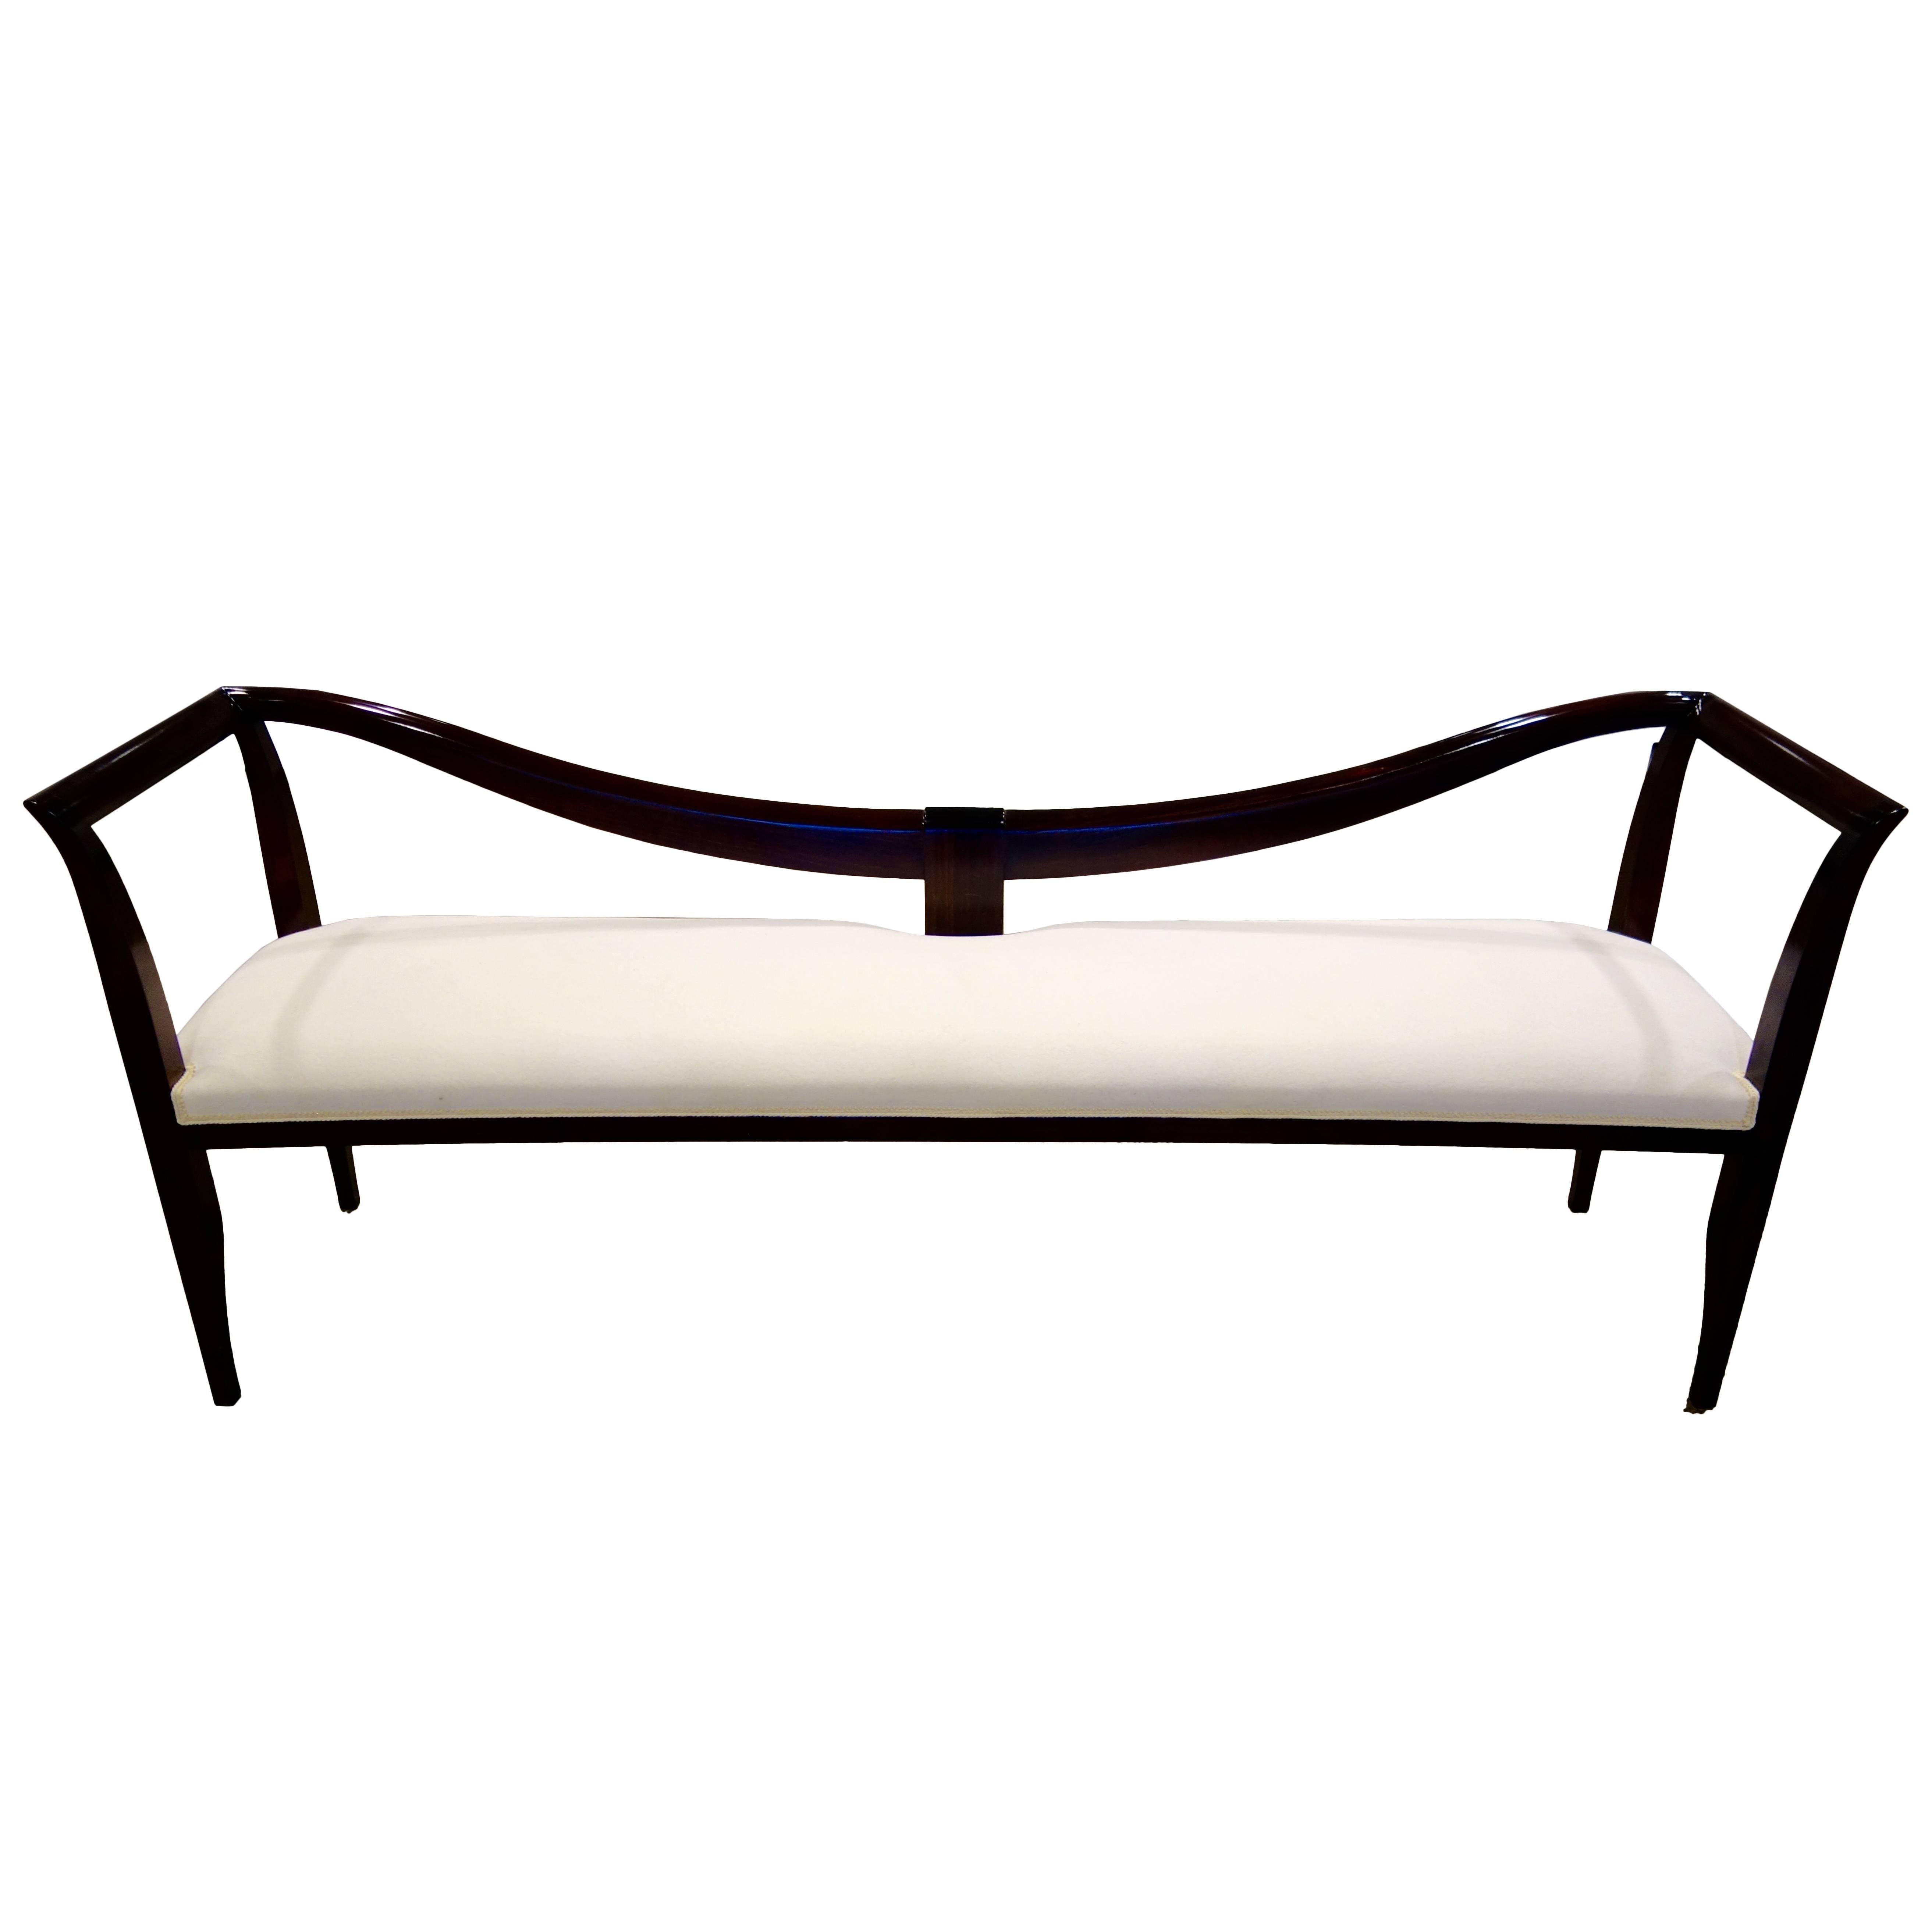 Italian 1939 Long Bench or Settee by Emilio Lancia, Pair Available